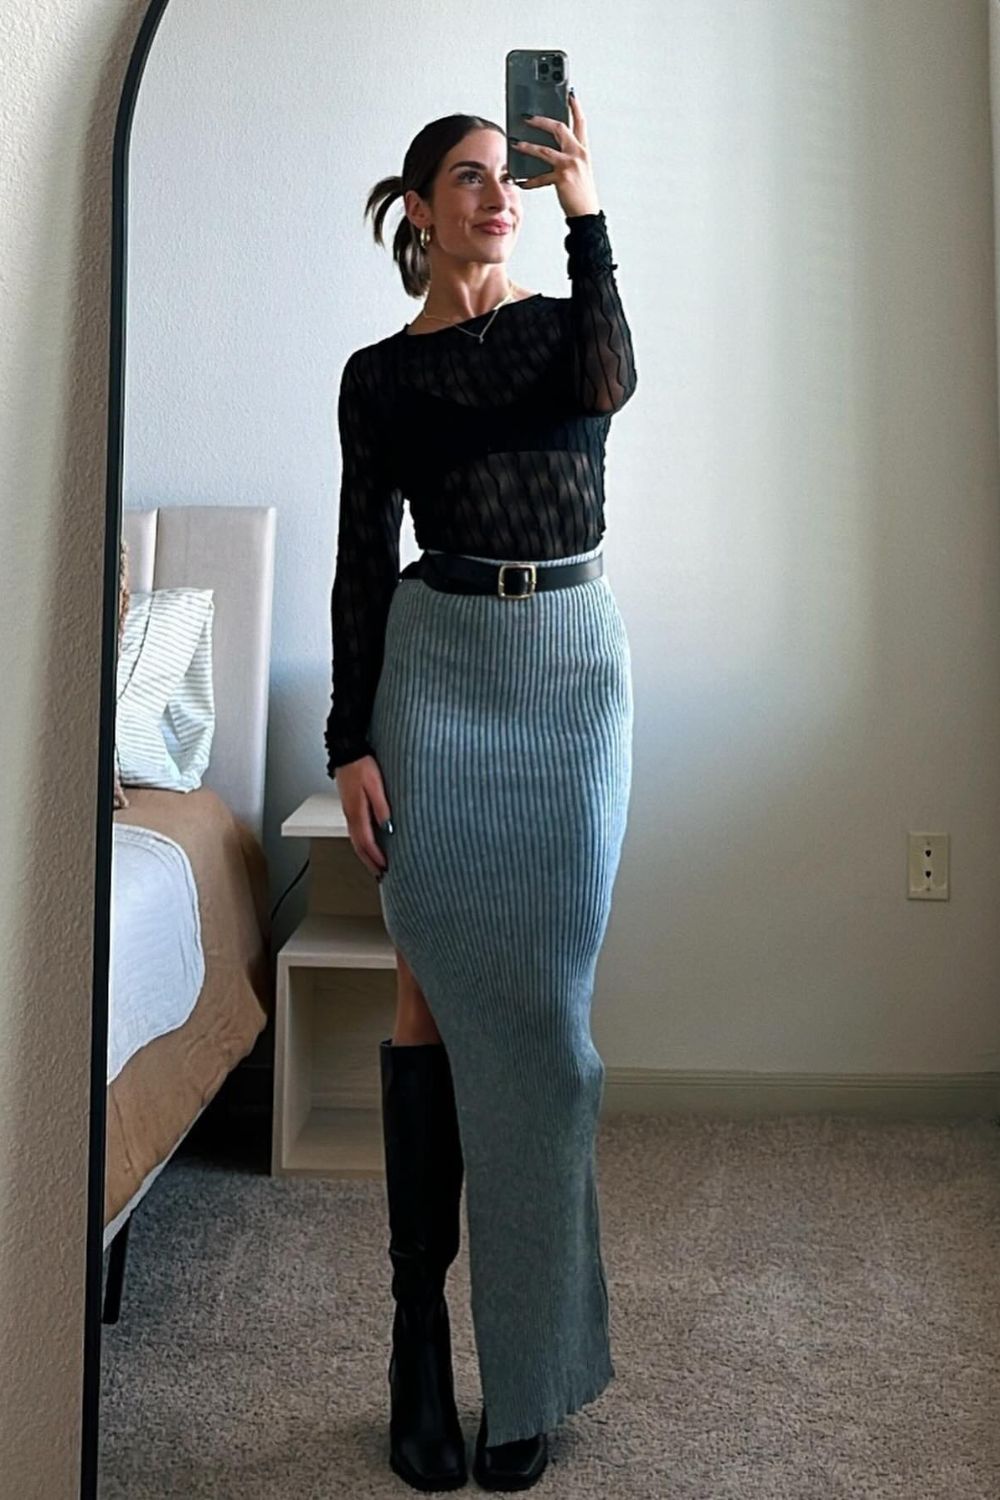 Textured Midi Skirt with High Slit + Black Long Sleeve Top + Knee High Boots